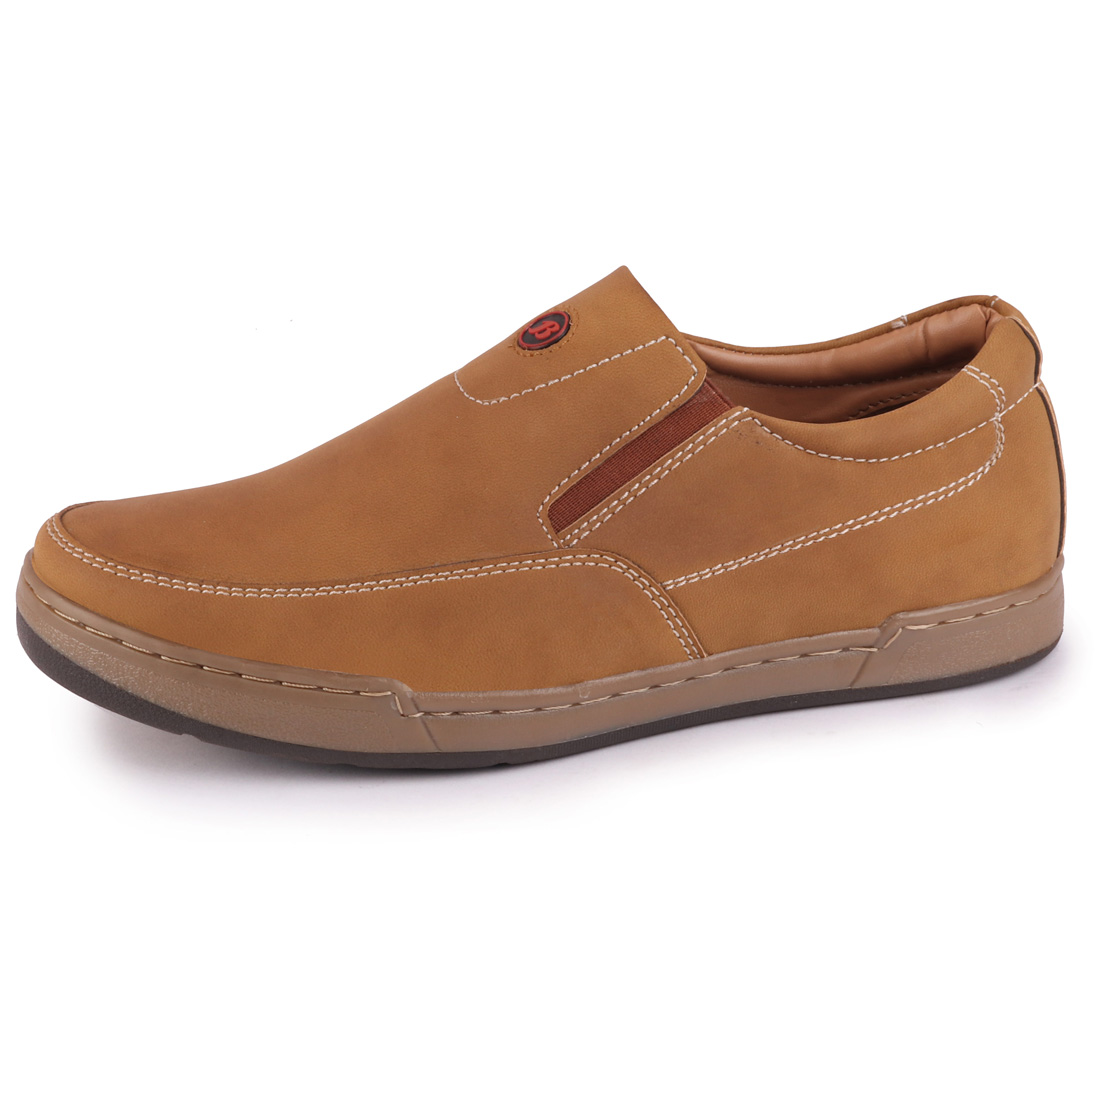 Buy Bata Men's Camel Loafers Casual Shoes Online @ ₹1229 from ShopClues